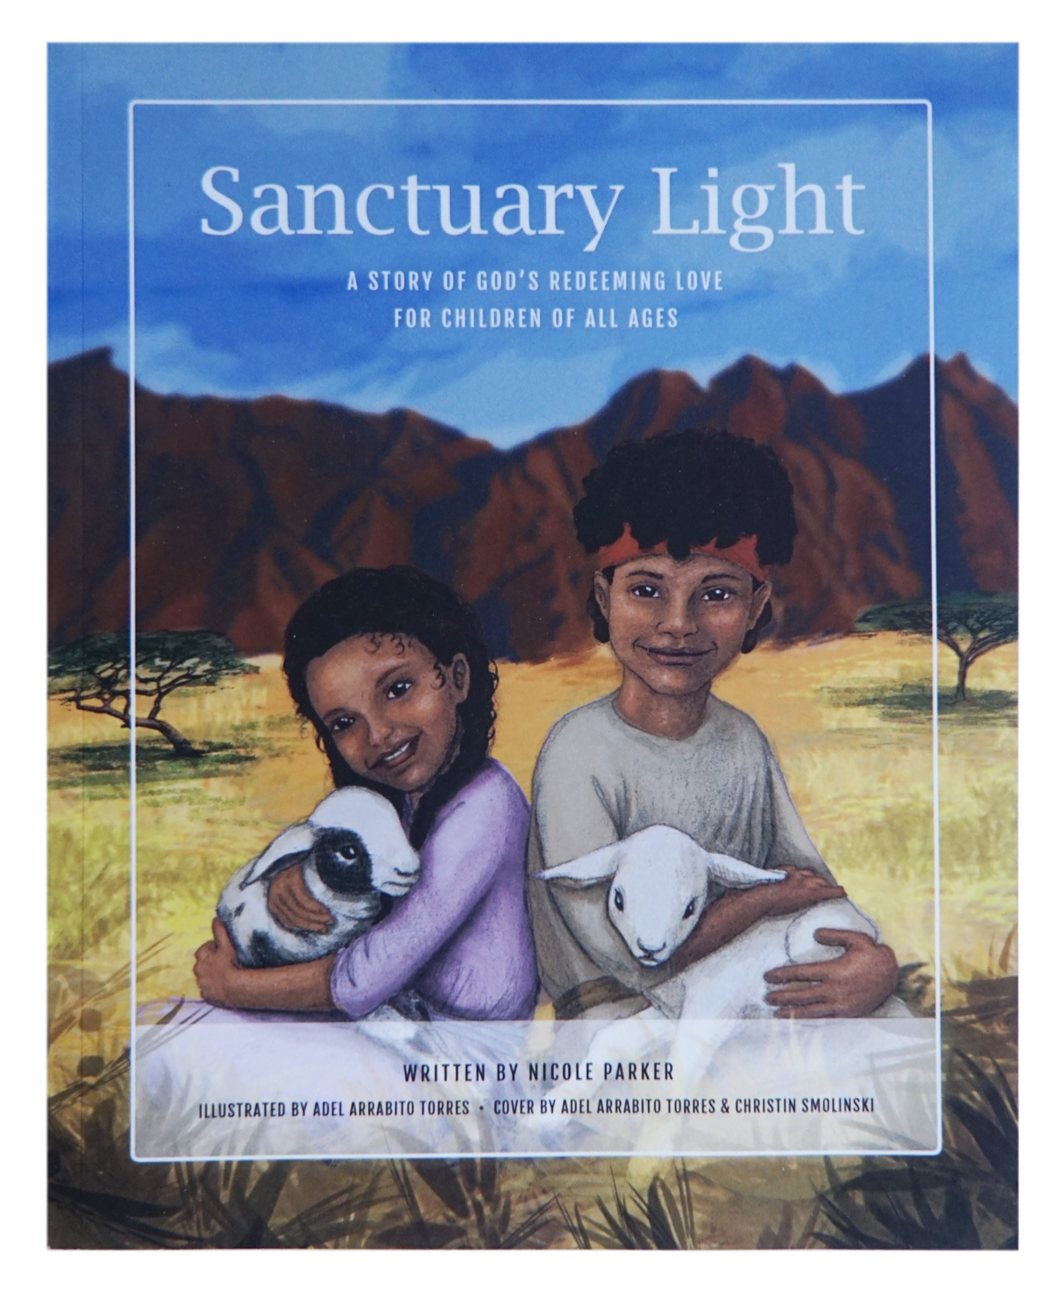 Sanctuary Light: A Story of God's Redeeming Love for Children of All Ages